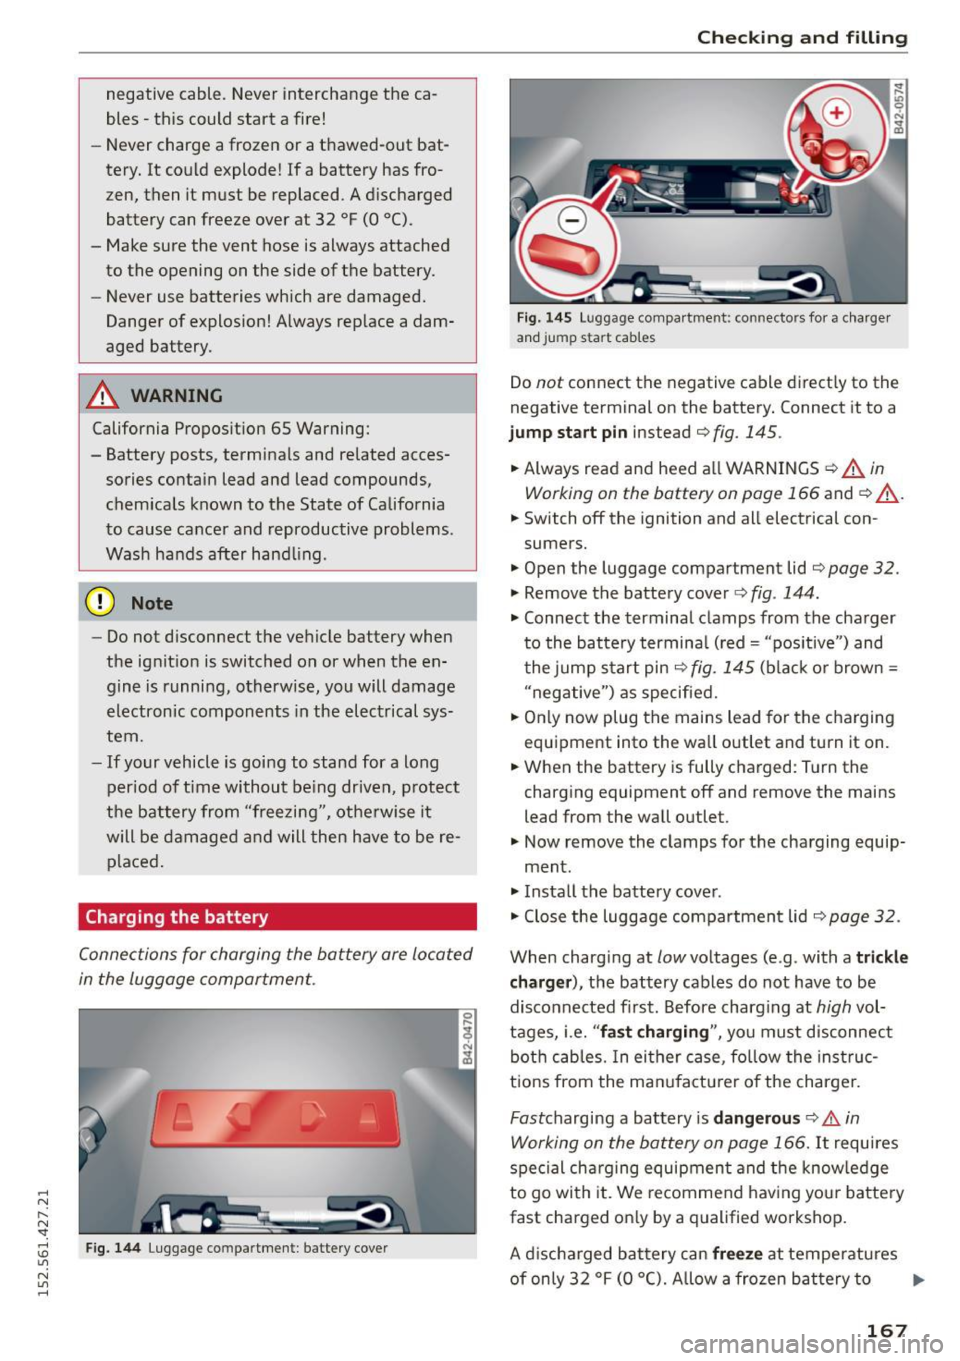 AUDI R8 SPYDER 2015  Owners Manual .... N 
l­
N "1: .... I.O 
" N 
" .... 
negative  cable.  Never  interchange  the  ca­
bles -this  could  start  a fire! 
- Never  charge  a frozen  or  a thawed-out  bat­
tery.  It  could  expl